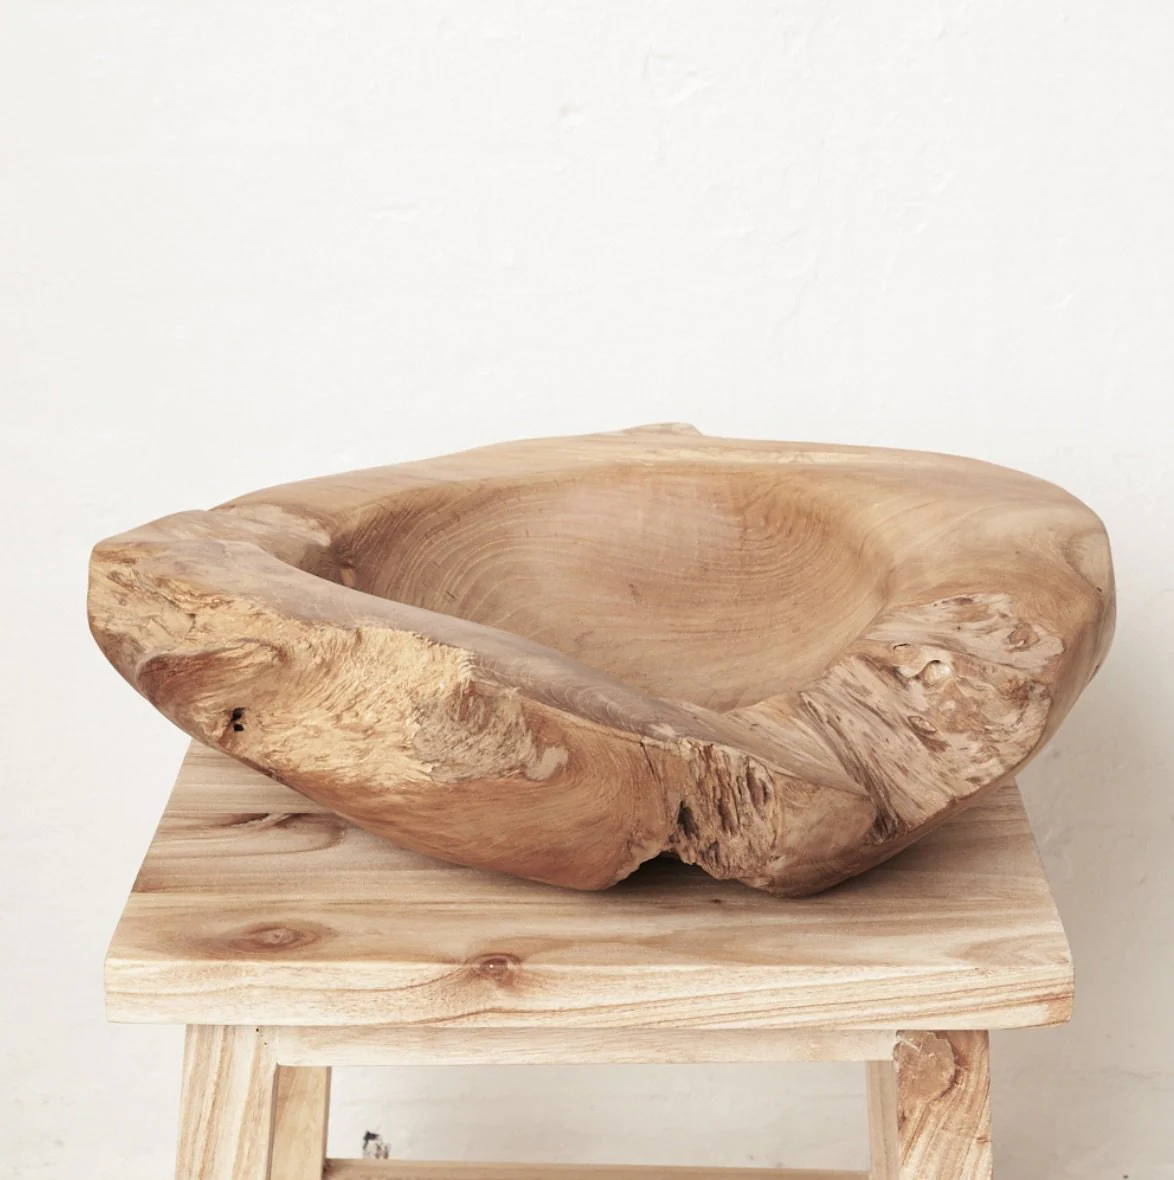 Yeira Large Teak Bowl by INARTISAN - This large timber bowl is a structural piece with exquisite imperfections.